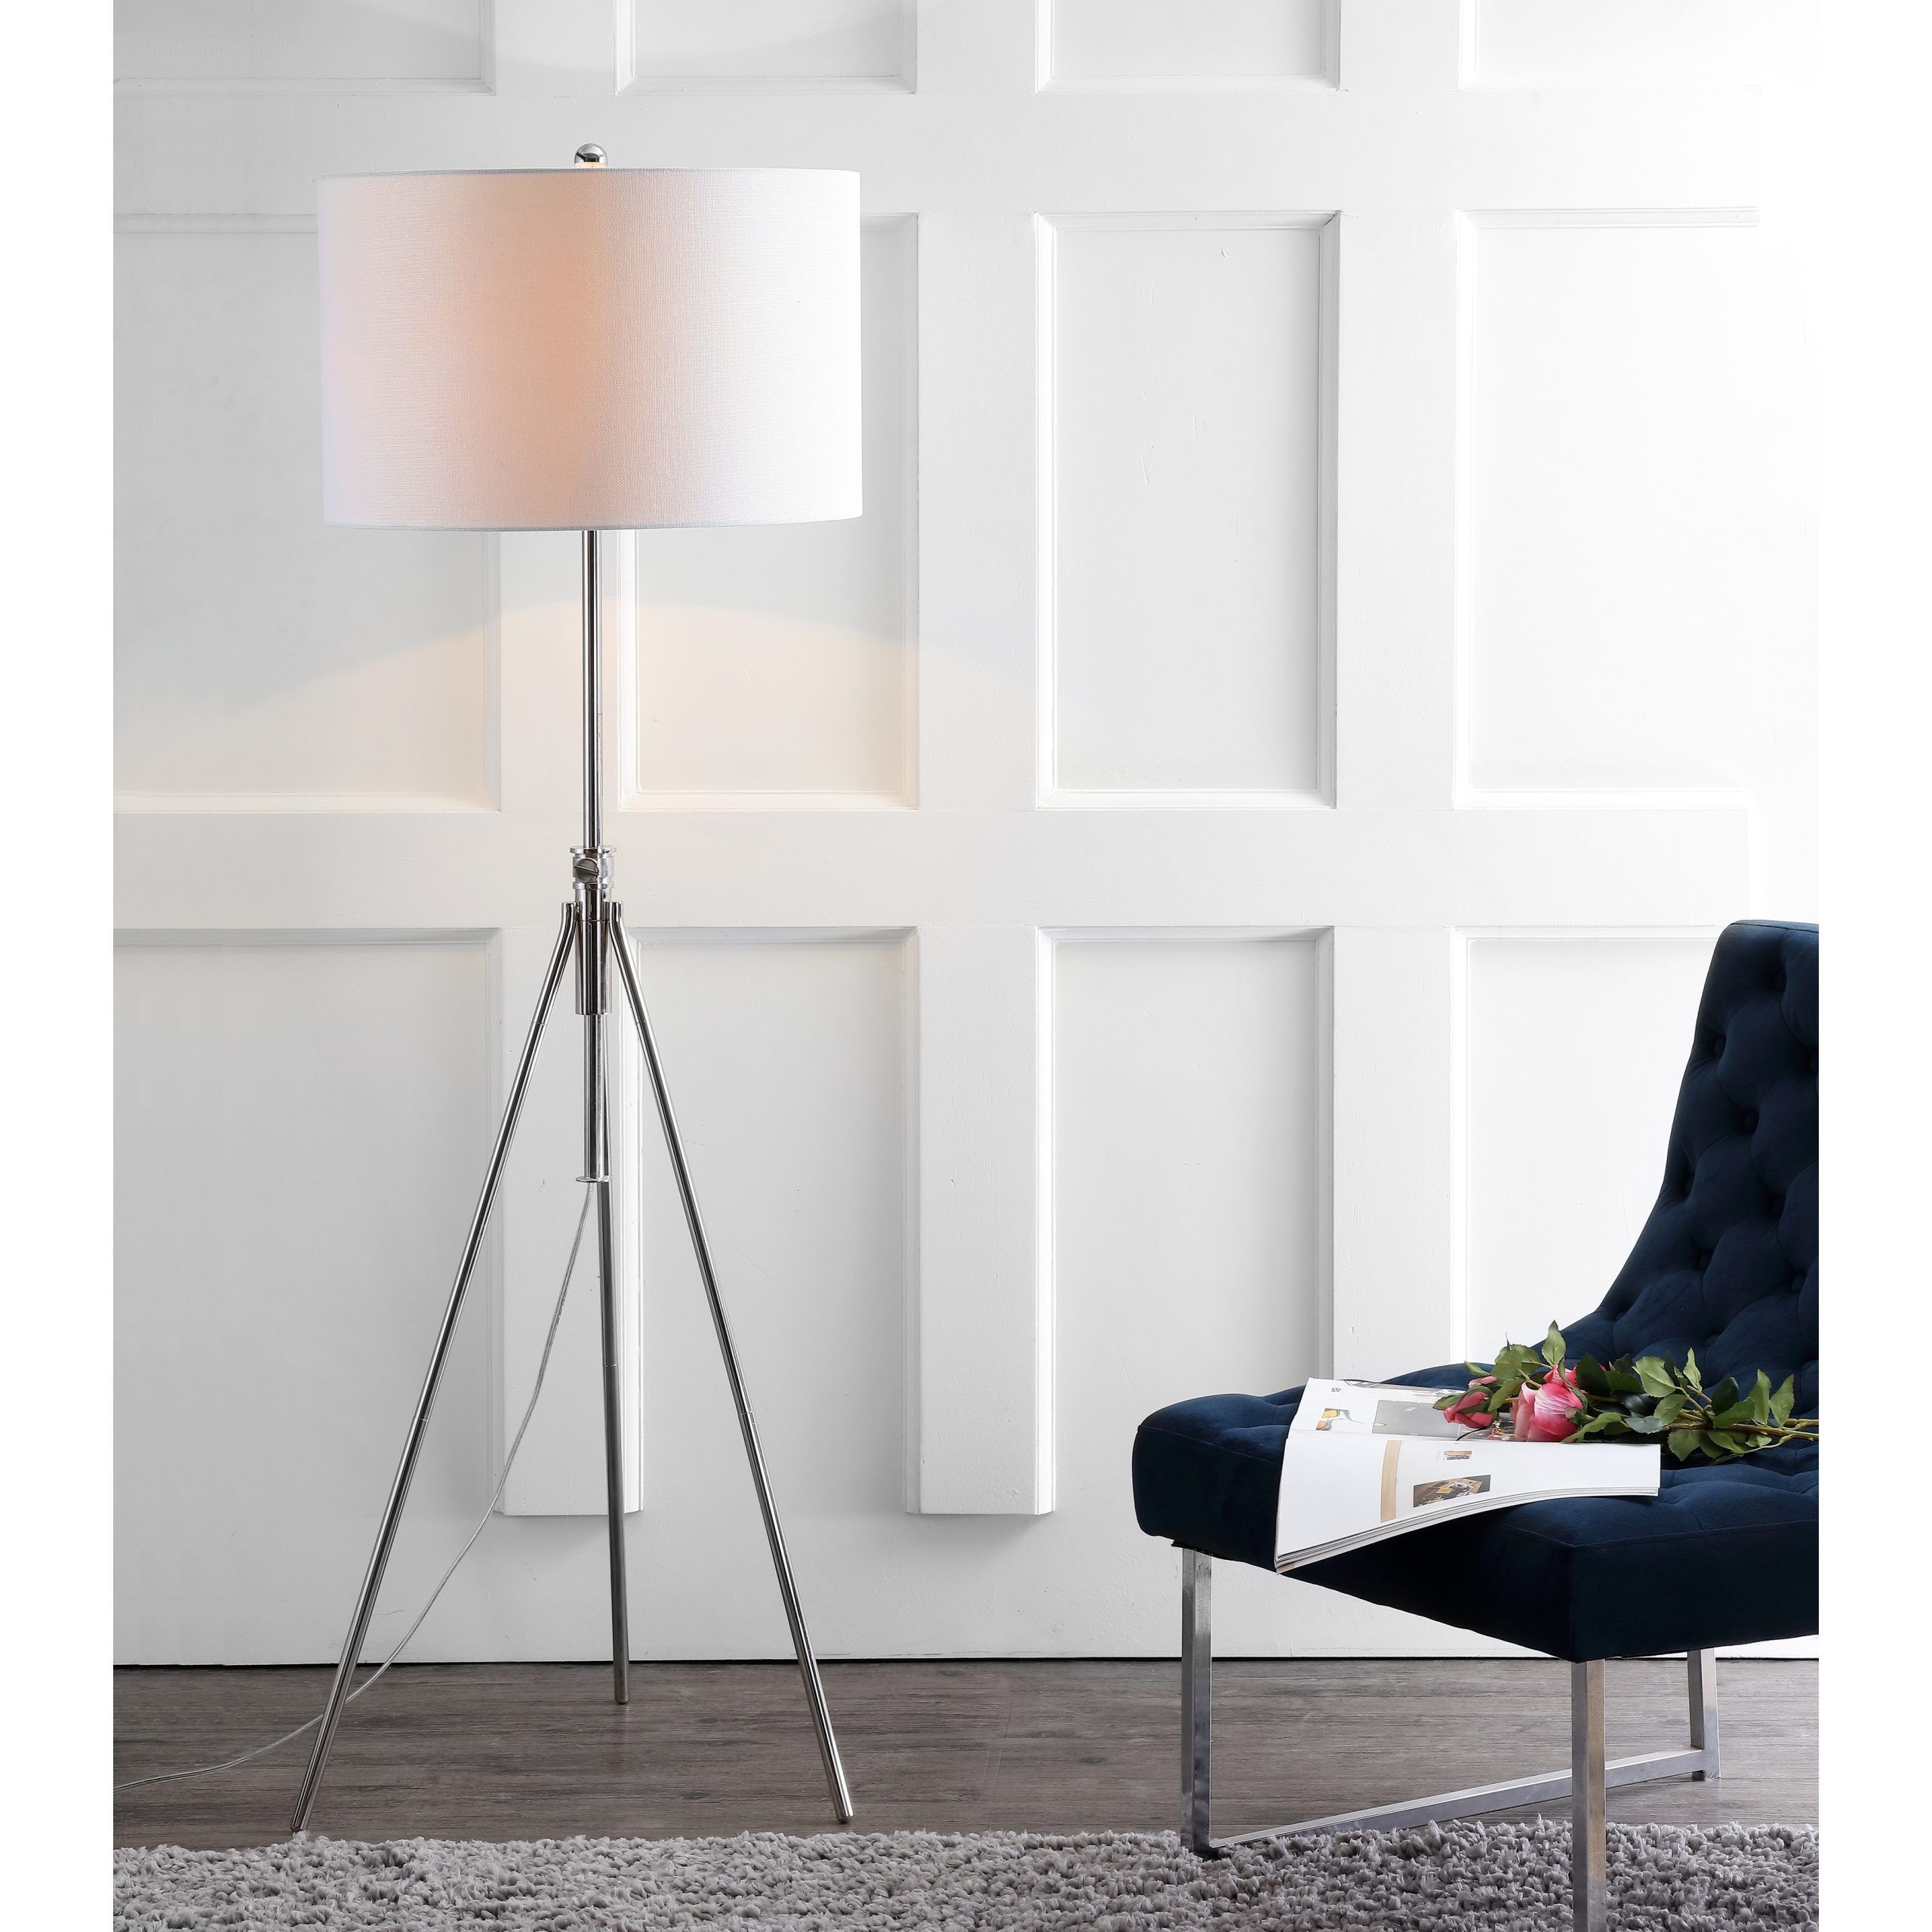 Safavieh Lighting 50 72 Inch Adjustable Cipriana White Floor Lamp – 23" X  23" X 50 72" – On Sale – Overstock – 22238433 With 50 Inch Floor Lamps (View 10 of 20)